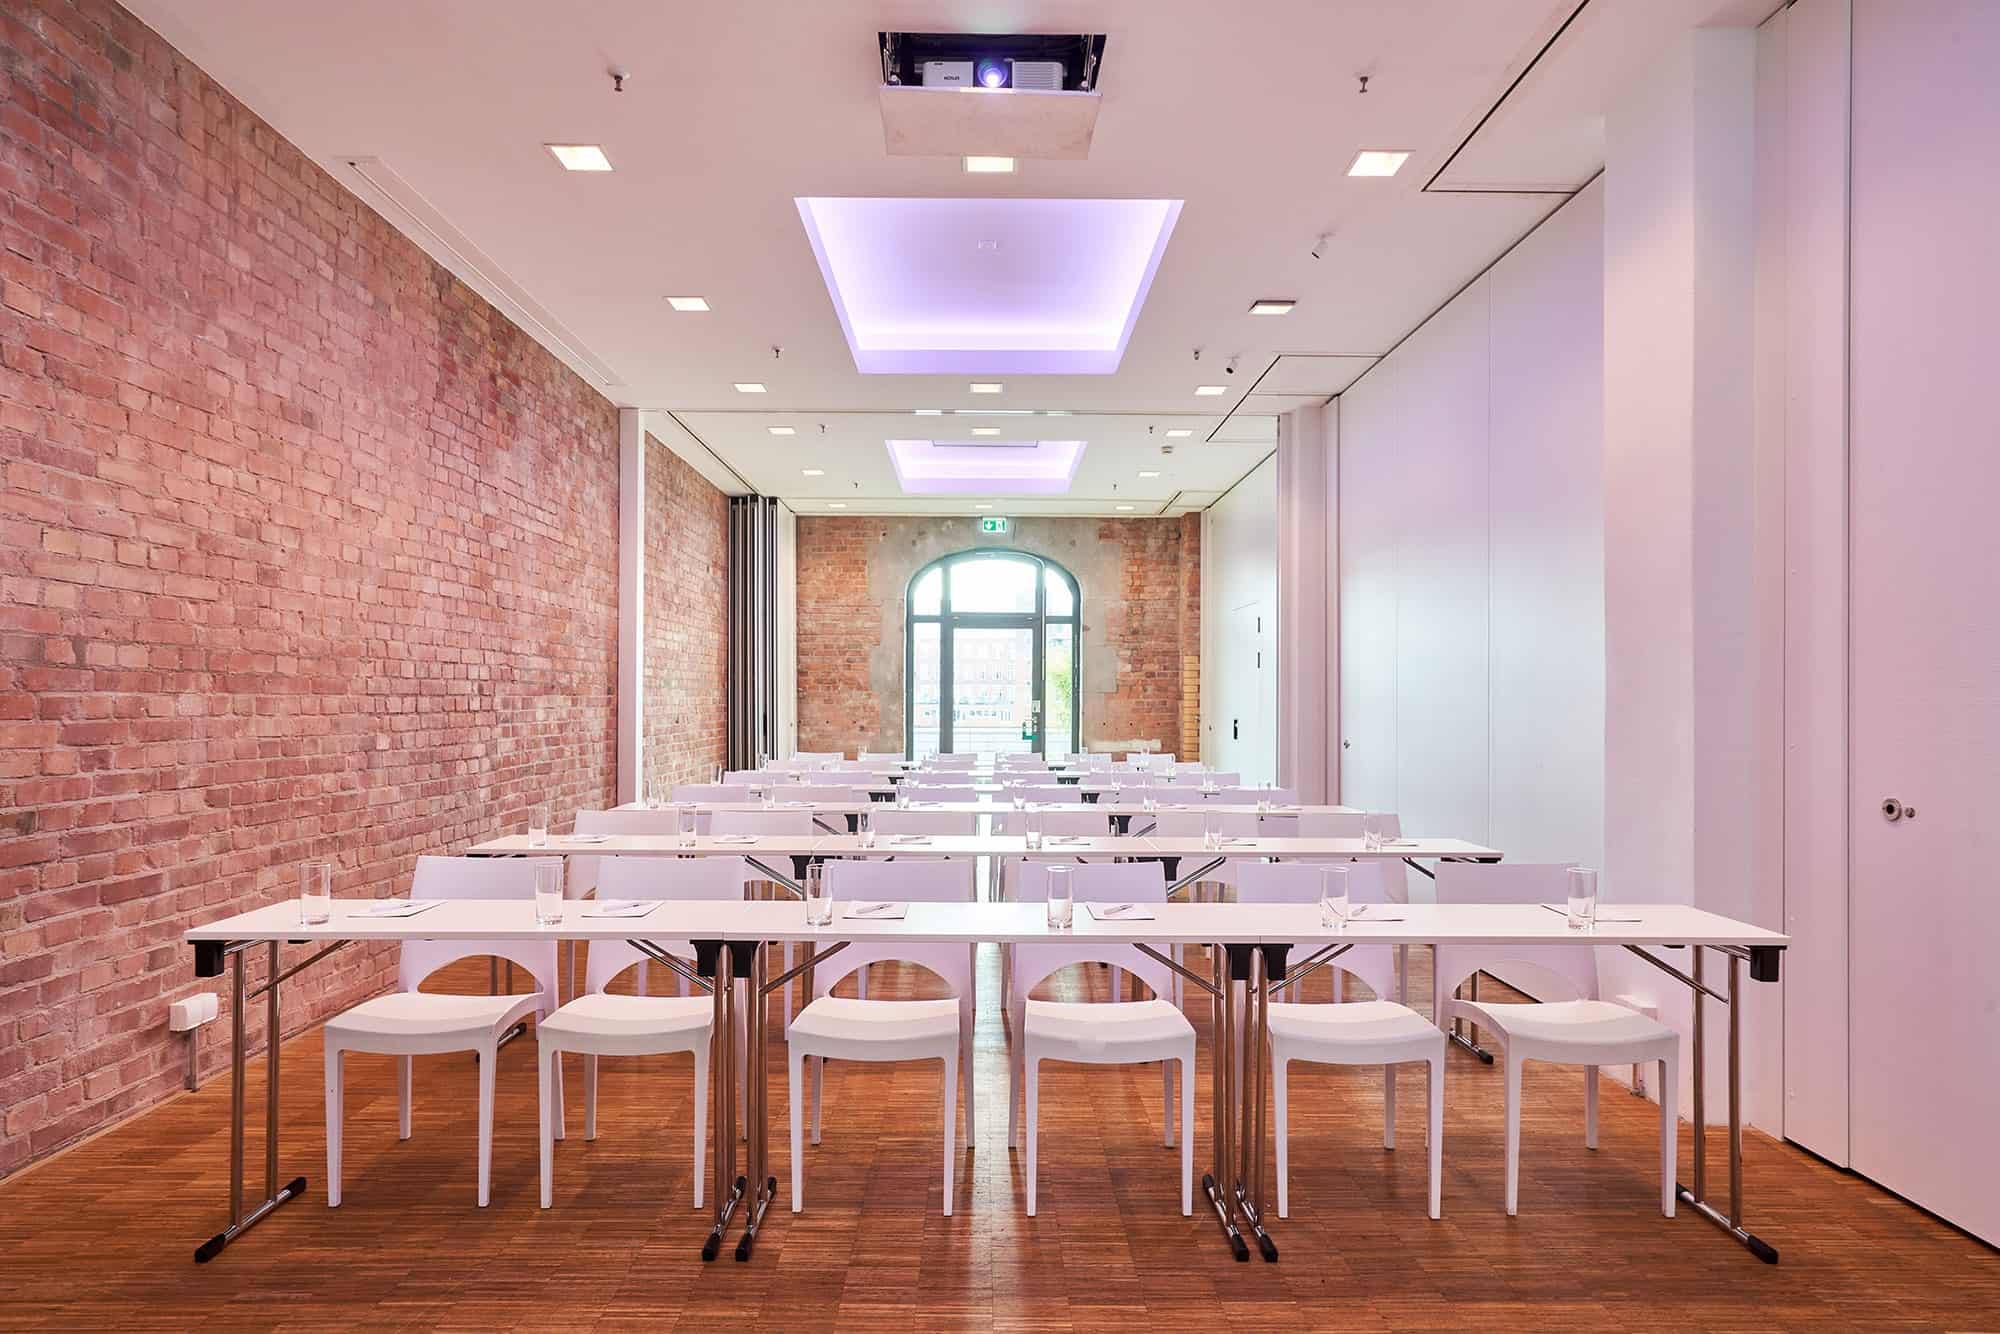 <div><strong>Room Friedrichshain 60 m²</strong><br> up to 30 people<br><br><span class='text-sm'> ✓ HD projector with HDMI connection<br> ✓ Access to the Spree Terrace<br> ✓ Conference chairs<br><br></span><strong>600€ room rental</strong><br><span class='text-sm'>plus additional costs<br></span></div>